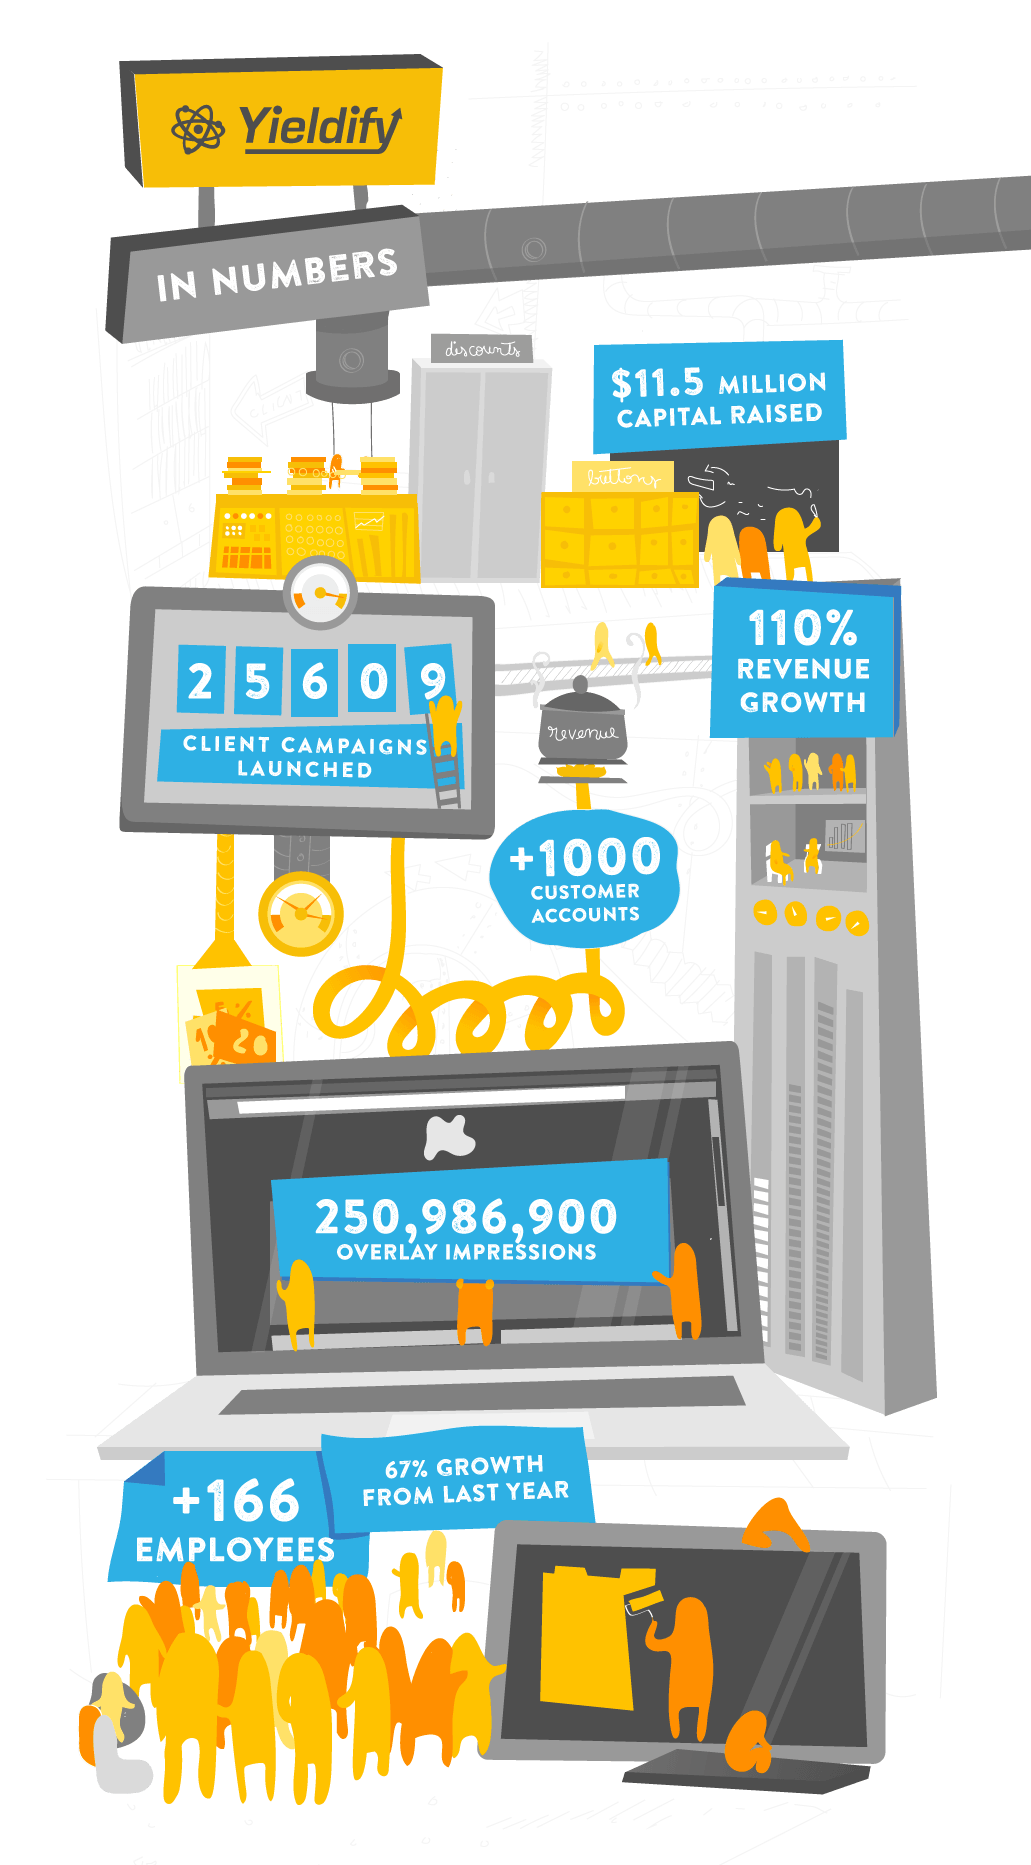 Yieldify 2015 in numbers infographic